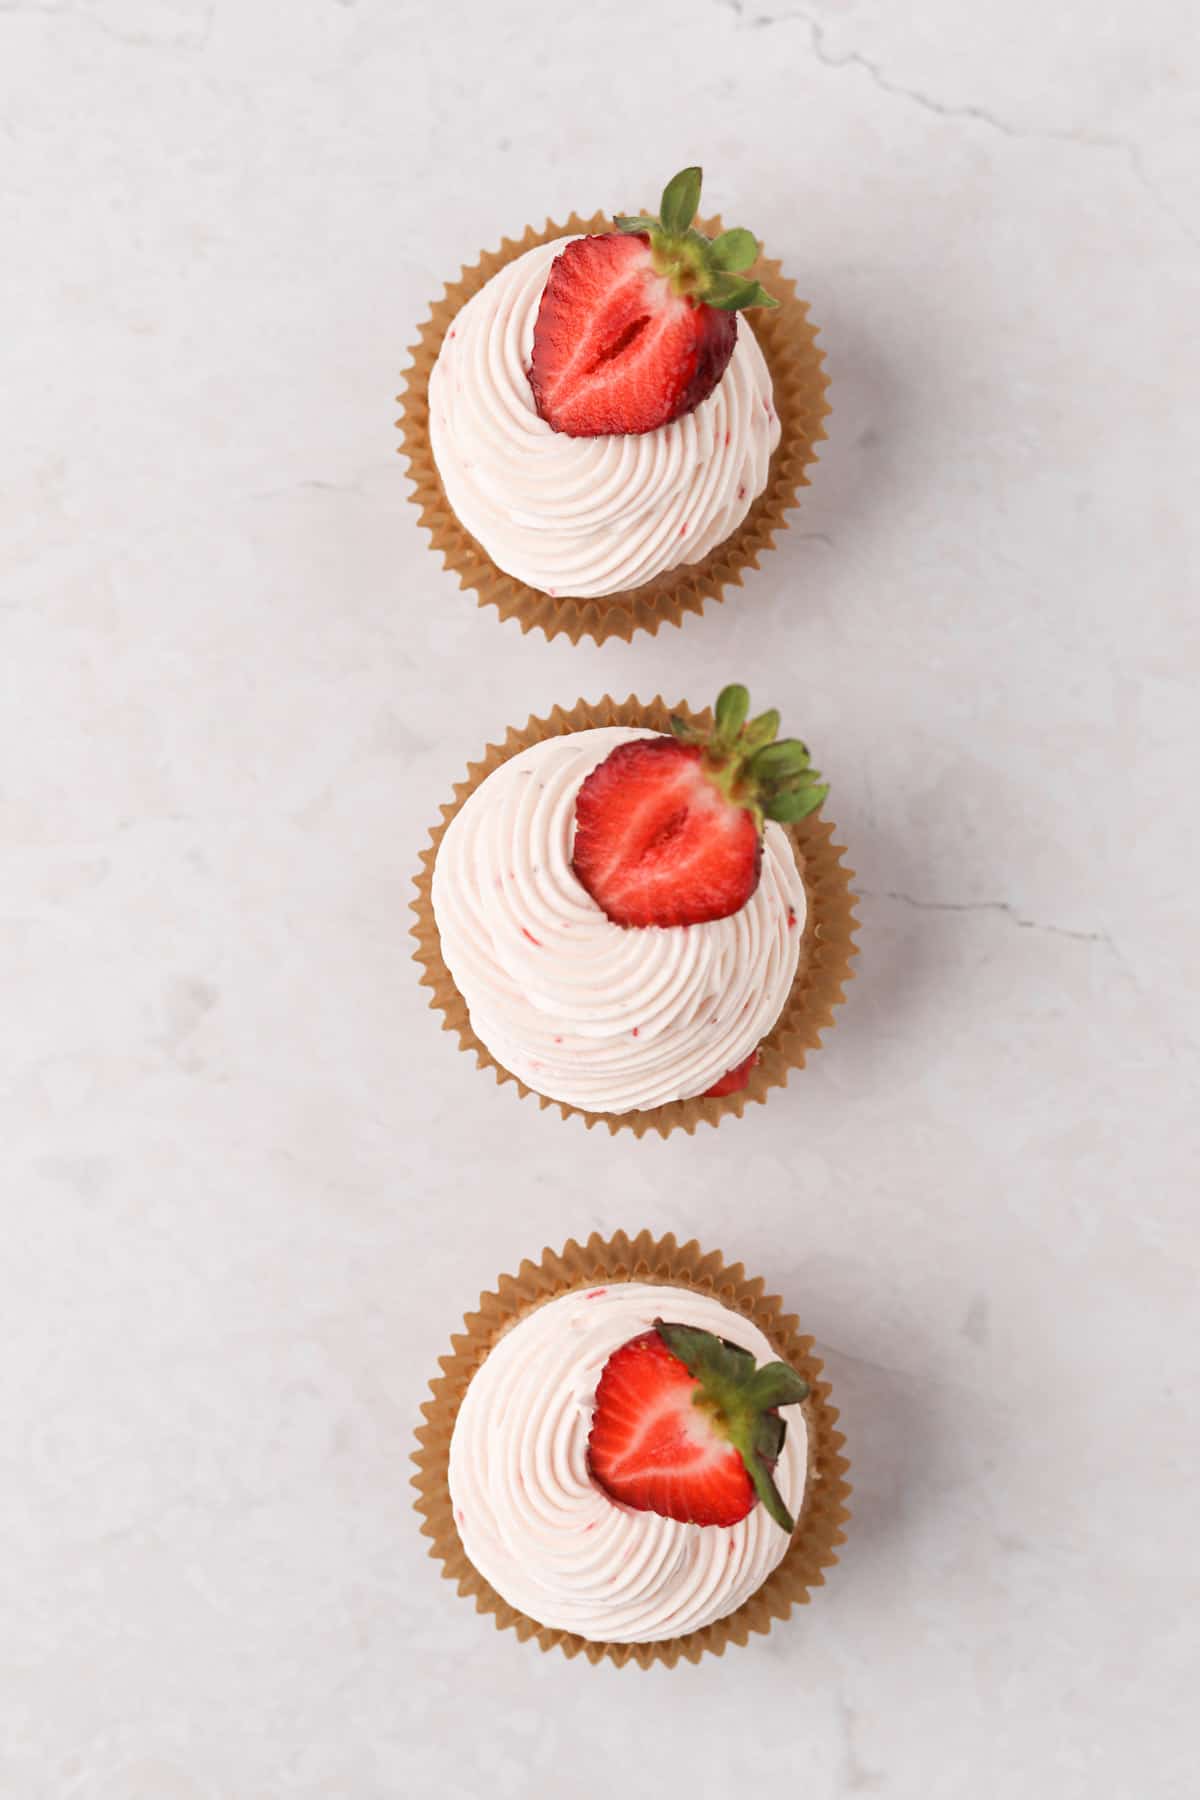 Three strawberry filled cupcakes with strawberry cream cheese frosting and a half strawberry for garnish.